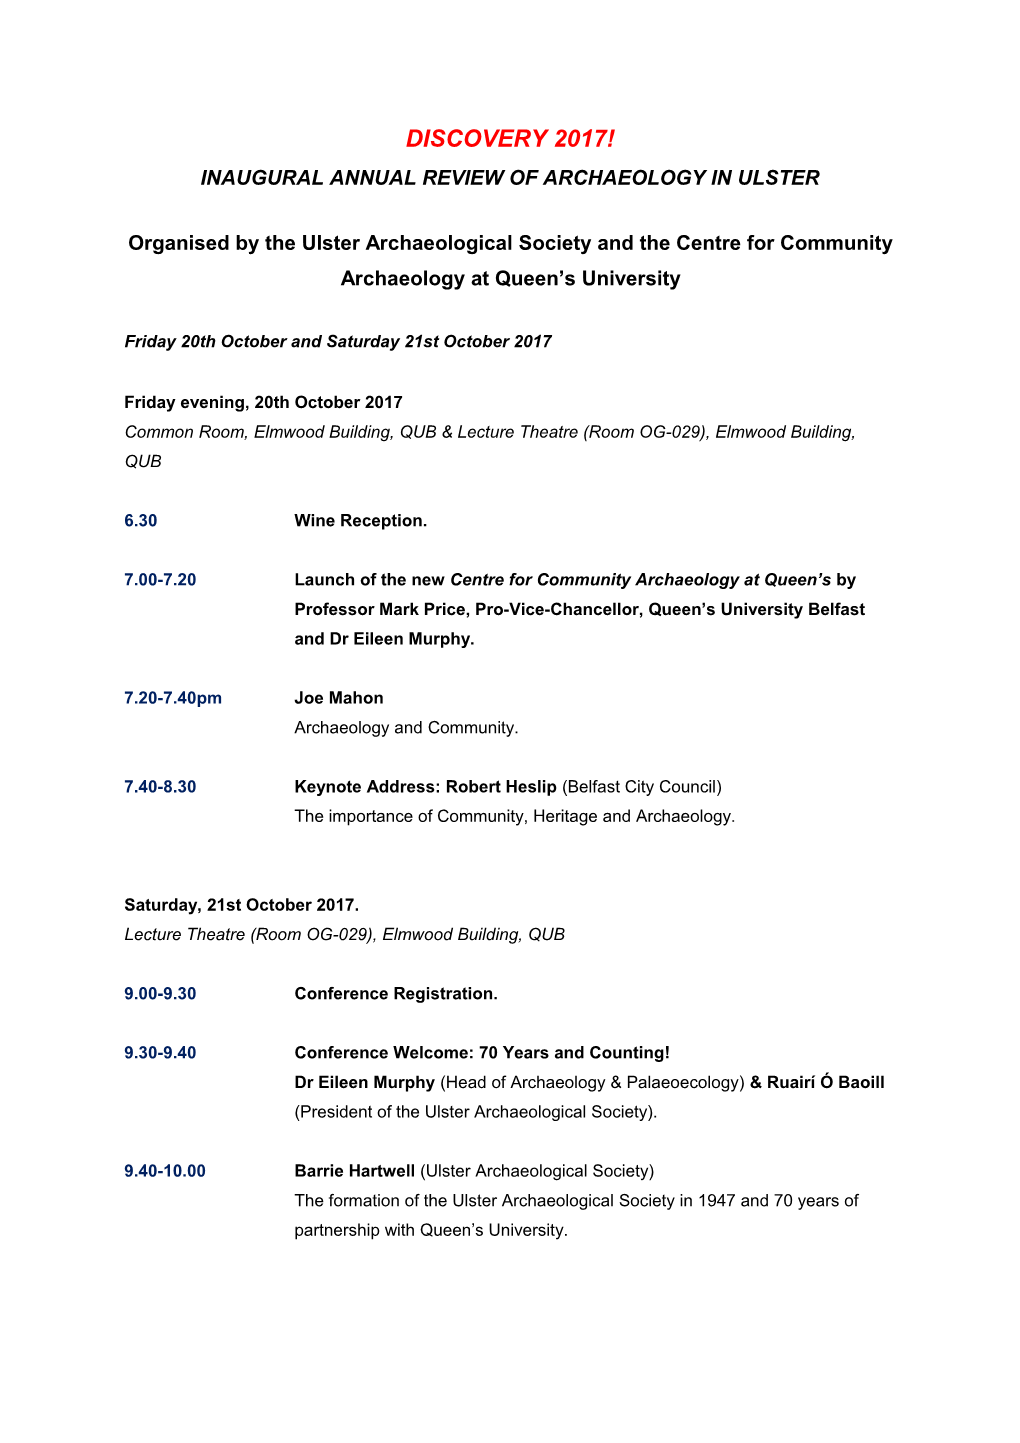 Inaugural Annual Review of Archaeology in Ulster